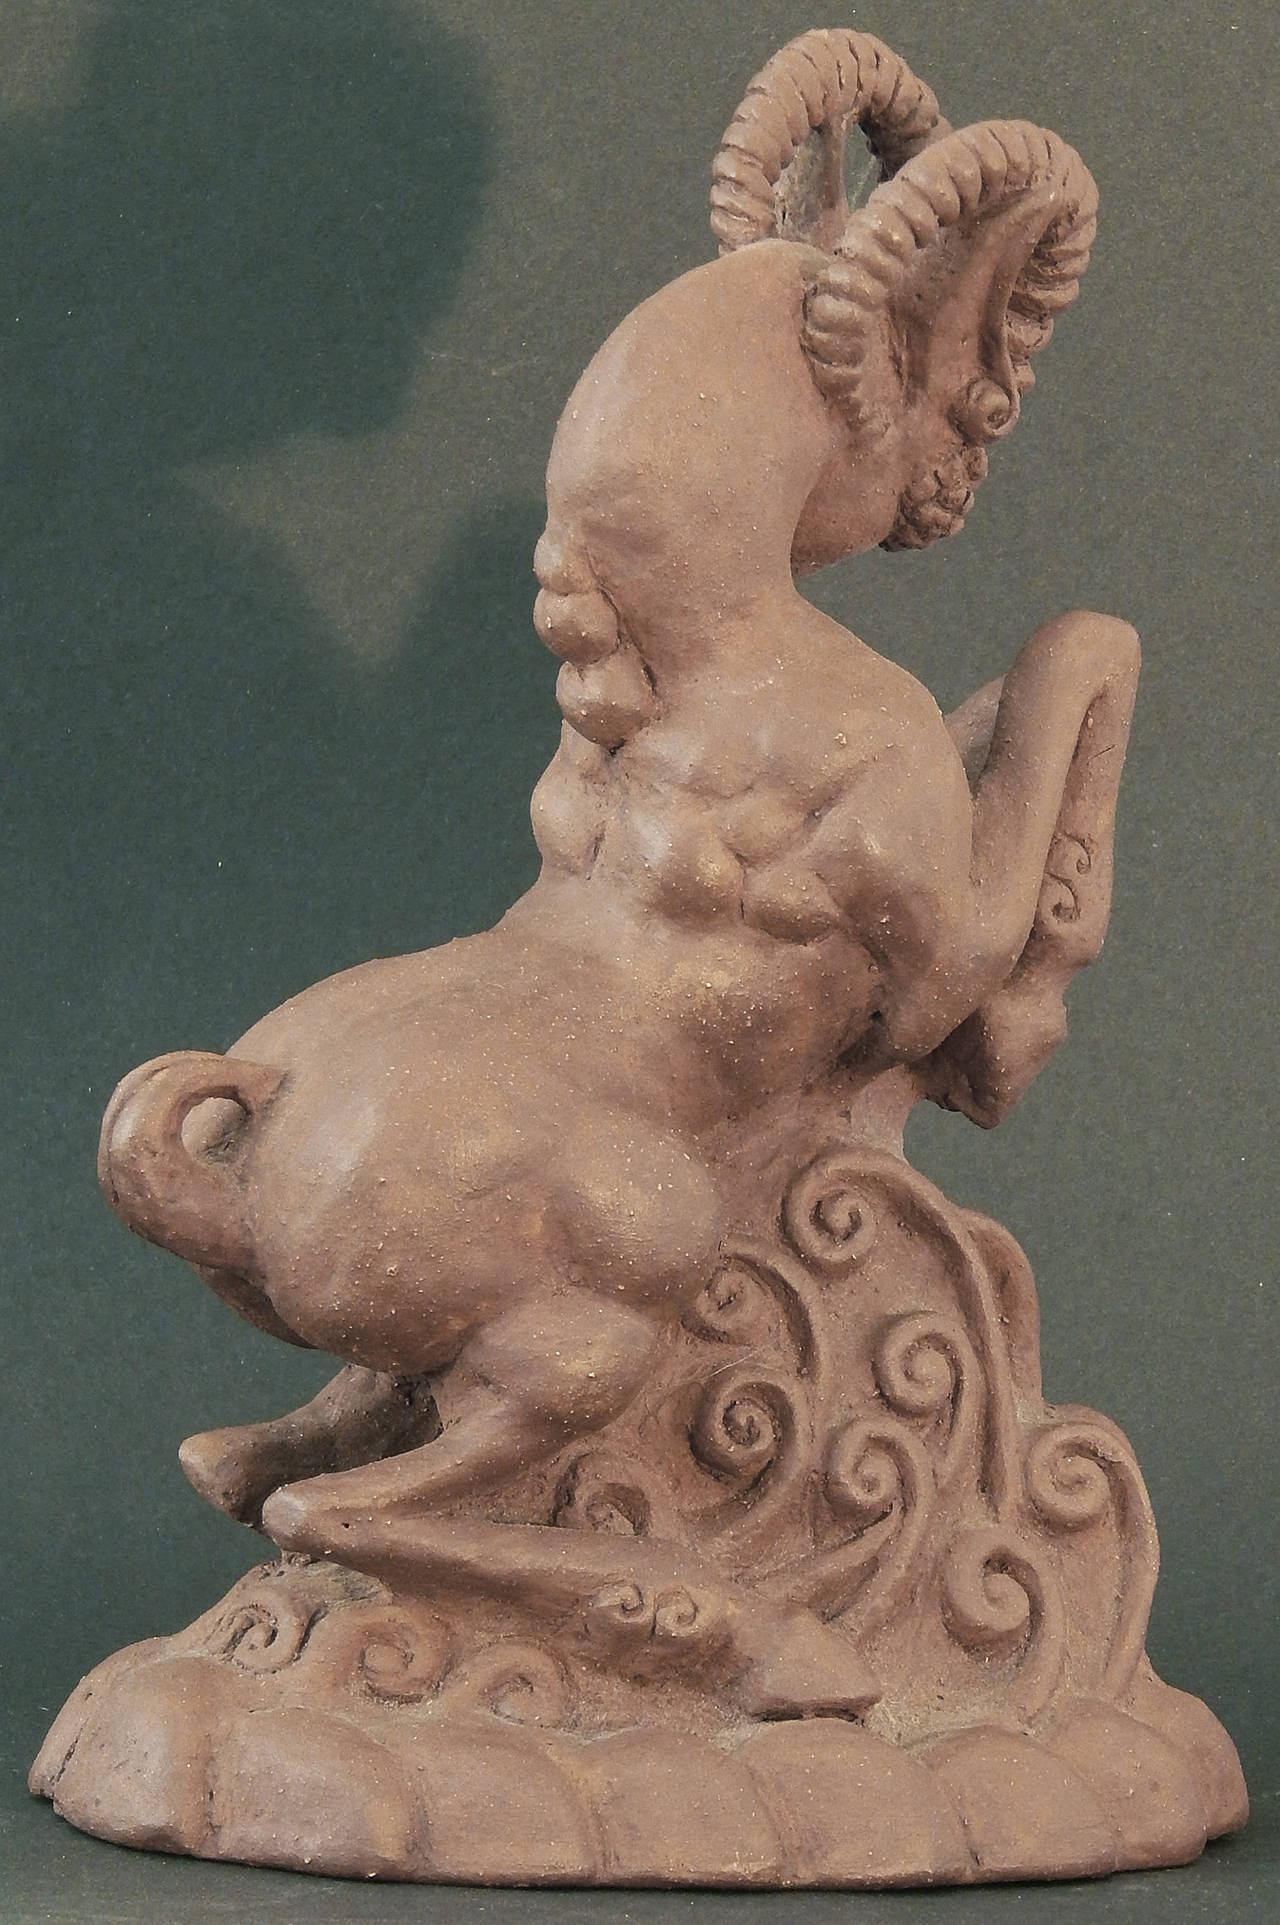 This unique Art Deco sculpture -- carved, not molded -- depicts a highly-stylized goat figure with the ears of a satyr rearing up over a mound of Art Deco tendrils. The mythological feeling of the goat is reminiscent of the animals that romped to